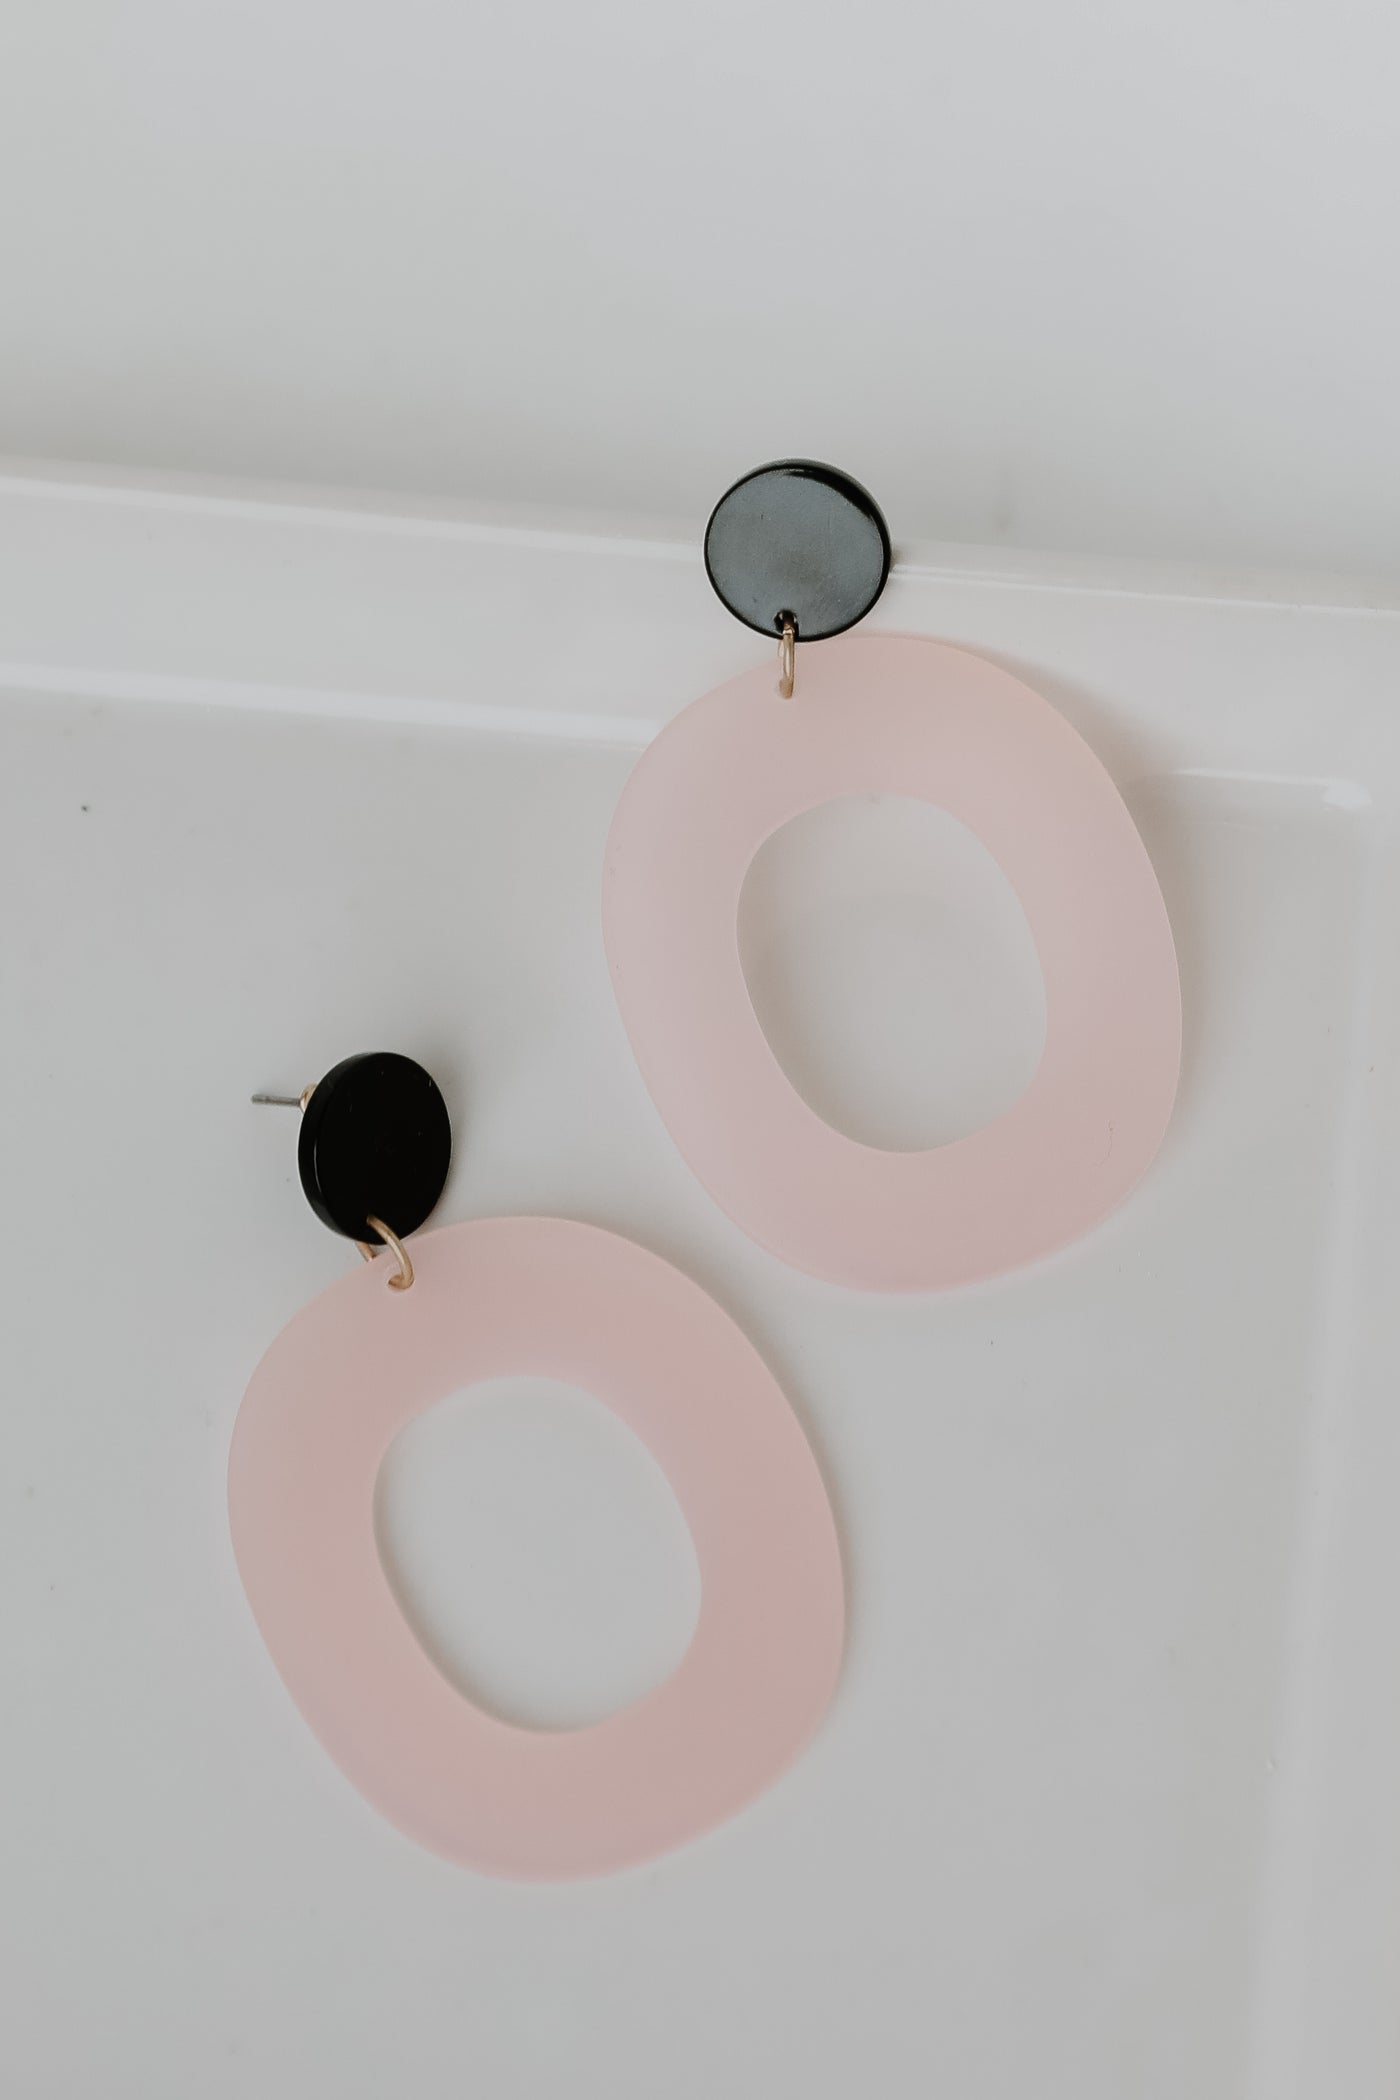 Acrylic Statement Earrings in pink flat lay